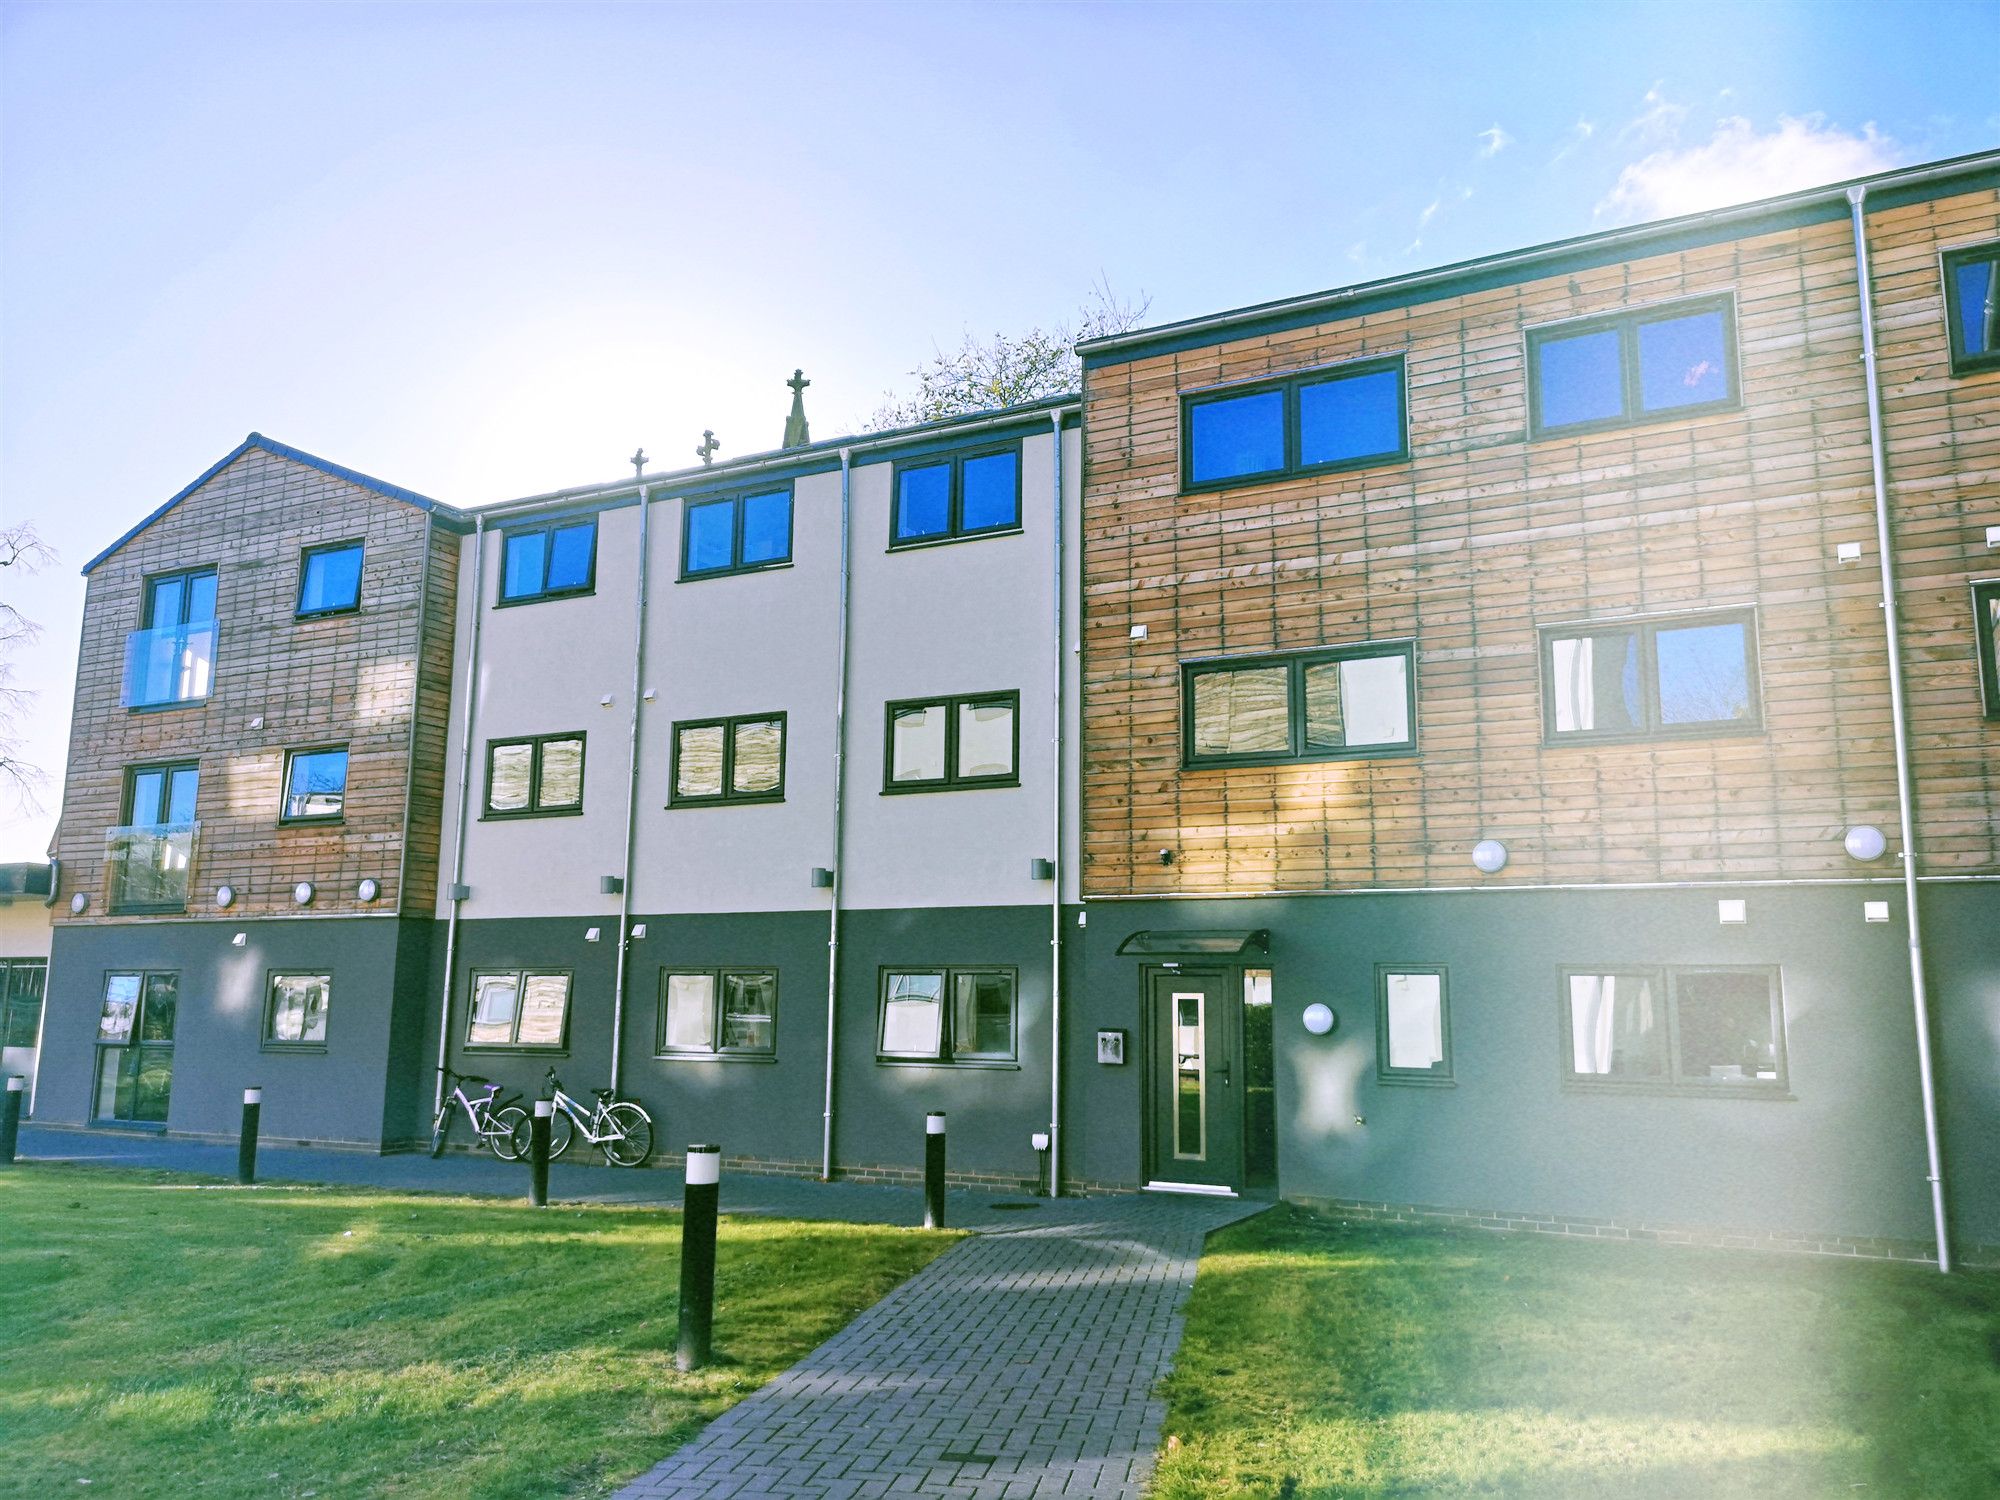 Forest Court Student Accommodation in Loughborough - Large selection of 199 en-suite rooms for all budgets